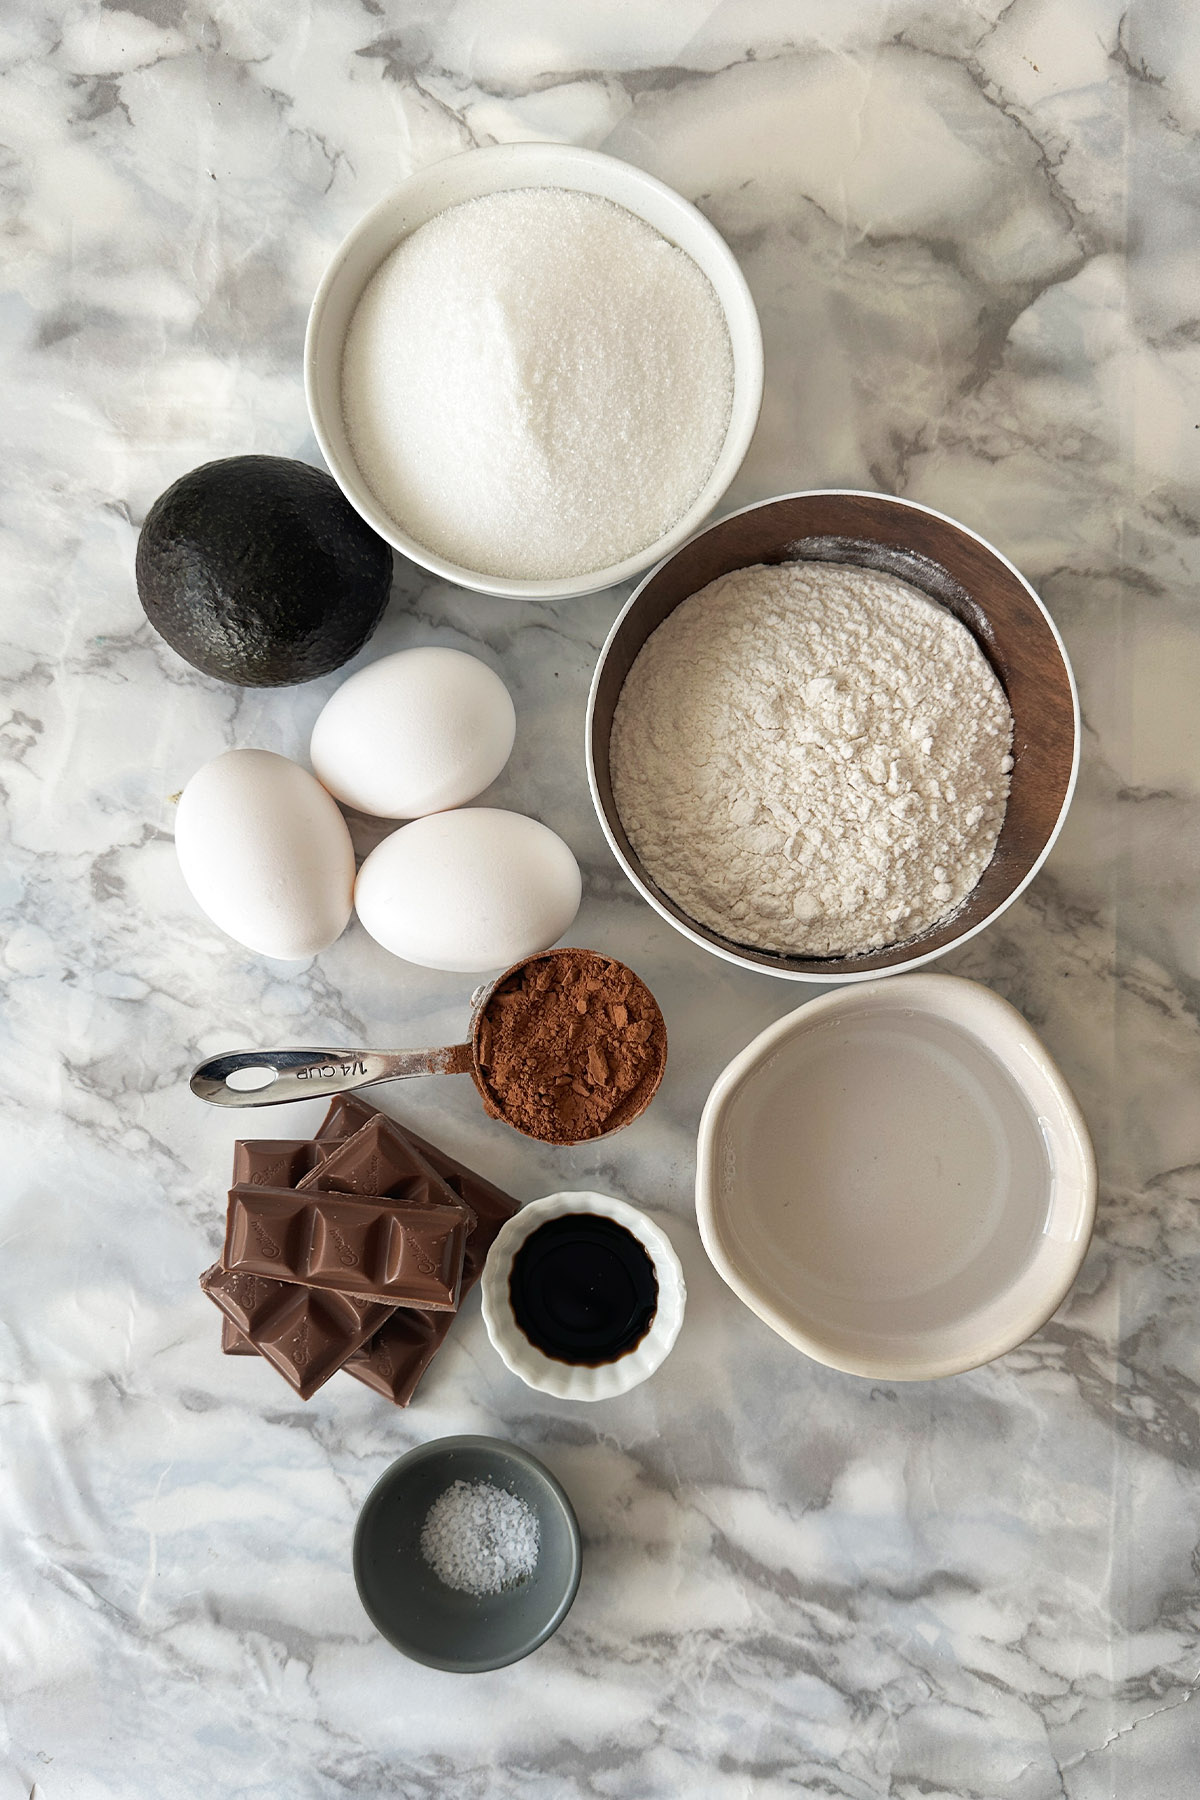 Ingredients for brownies in bowls on a white marble counter.